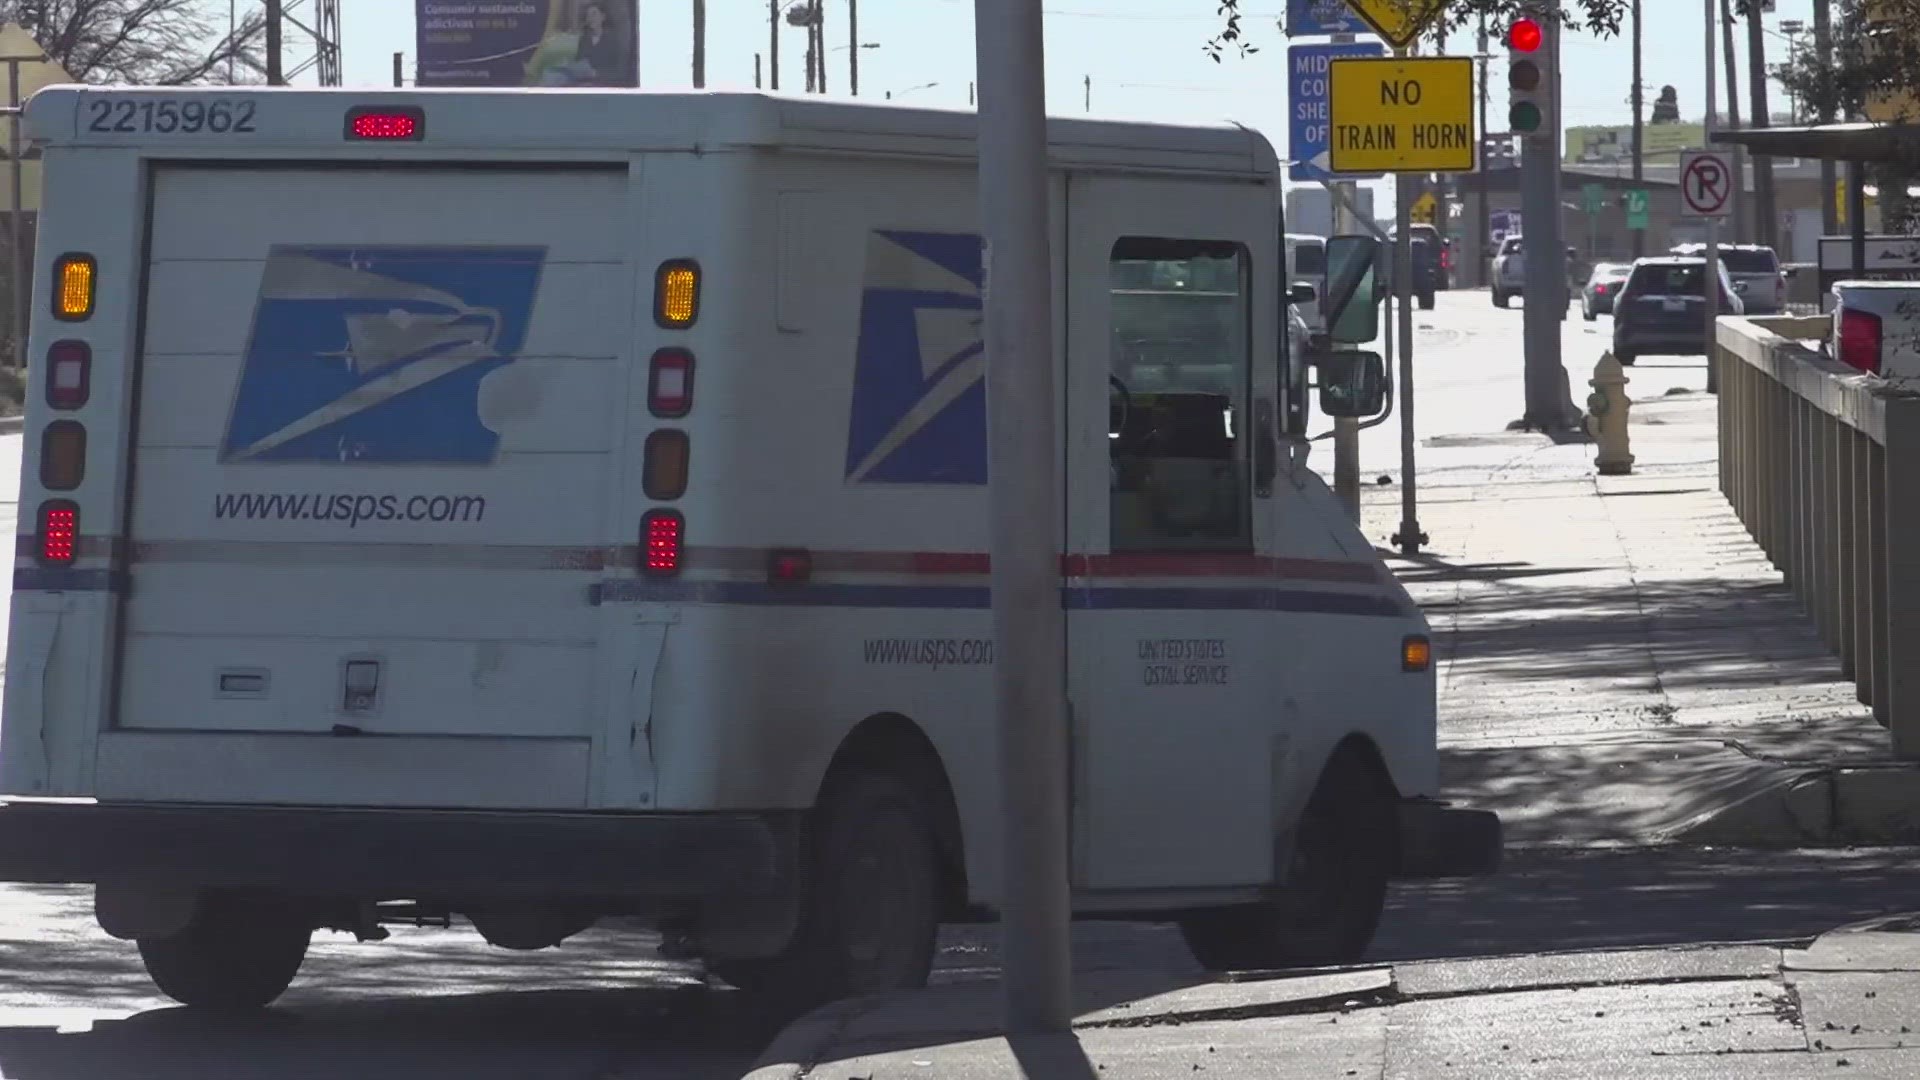 Outgoing mail would process and transfer to either Amarillo or stay in West Texas. With an investment by the USPS, the focus on community mail could be improved.